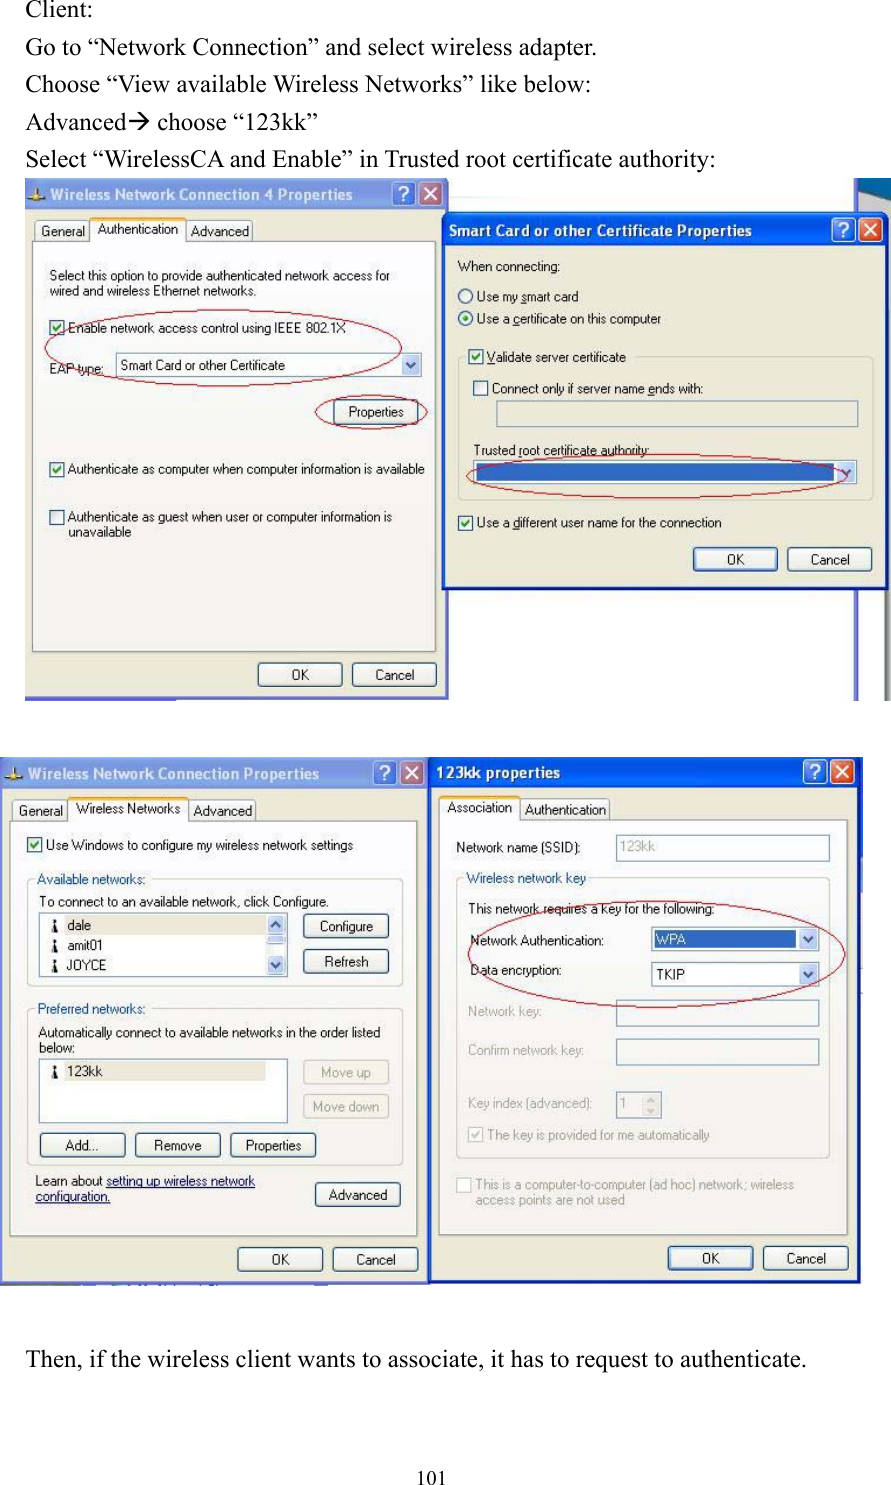  101Client: Go to “Network Connection” and select wireless adapter. Choose “View available Wireless Networks” like below: AdvancedÆ choose “123kk” Select “WirelessCA and Enable” in Trusted root certificate authority:            Then, if the wireless client wants to associate, it has to request to authenticate.       